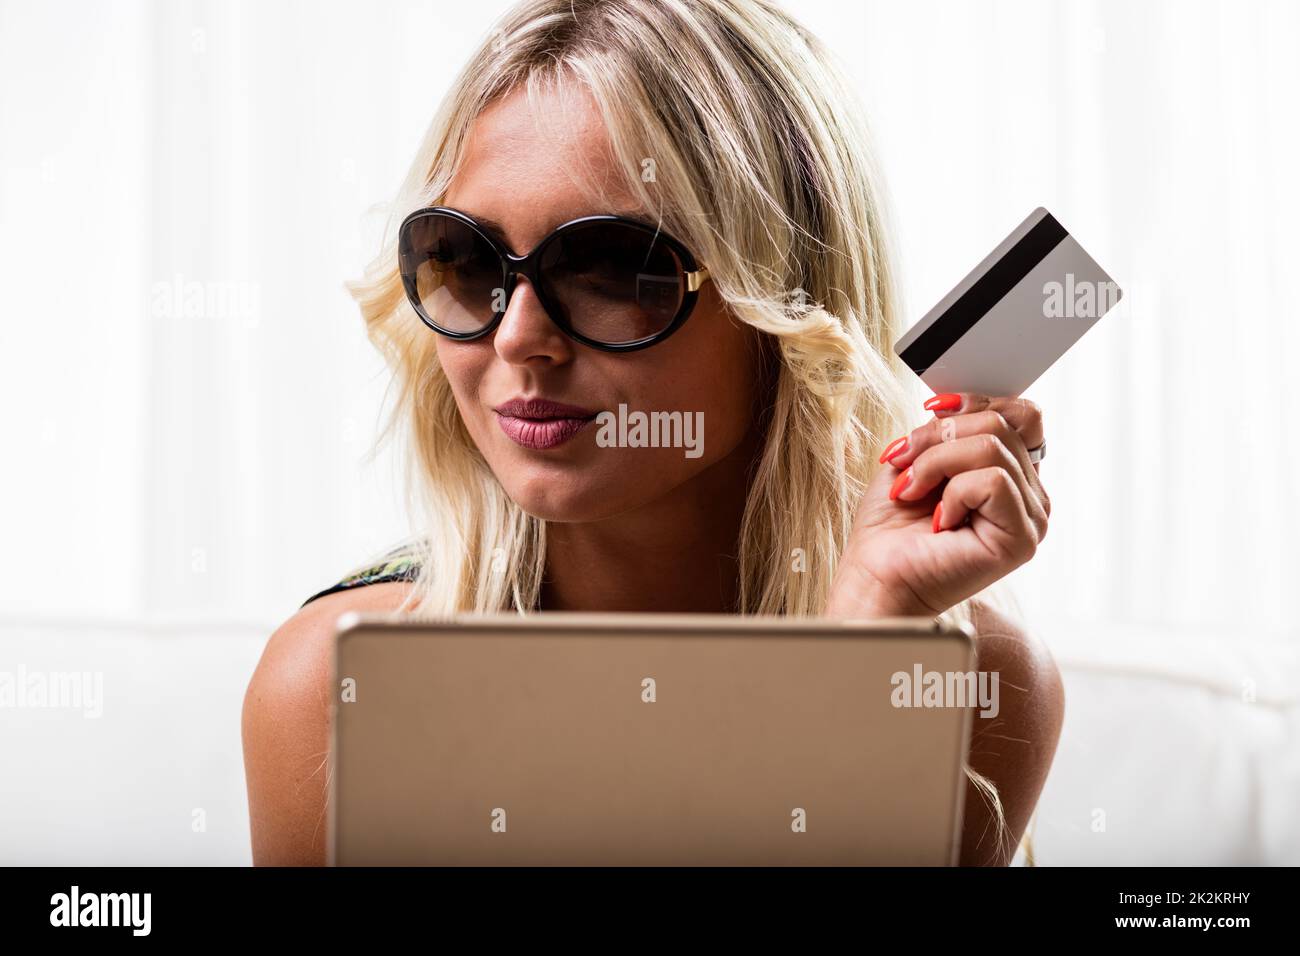 Grinning woman with credit card and tablet Stock Photo